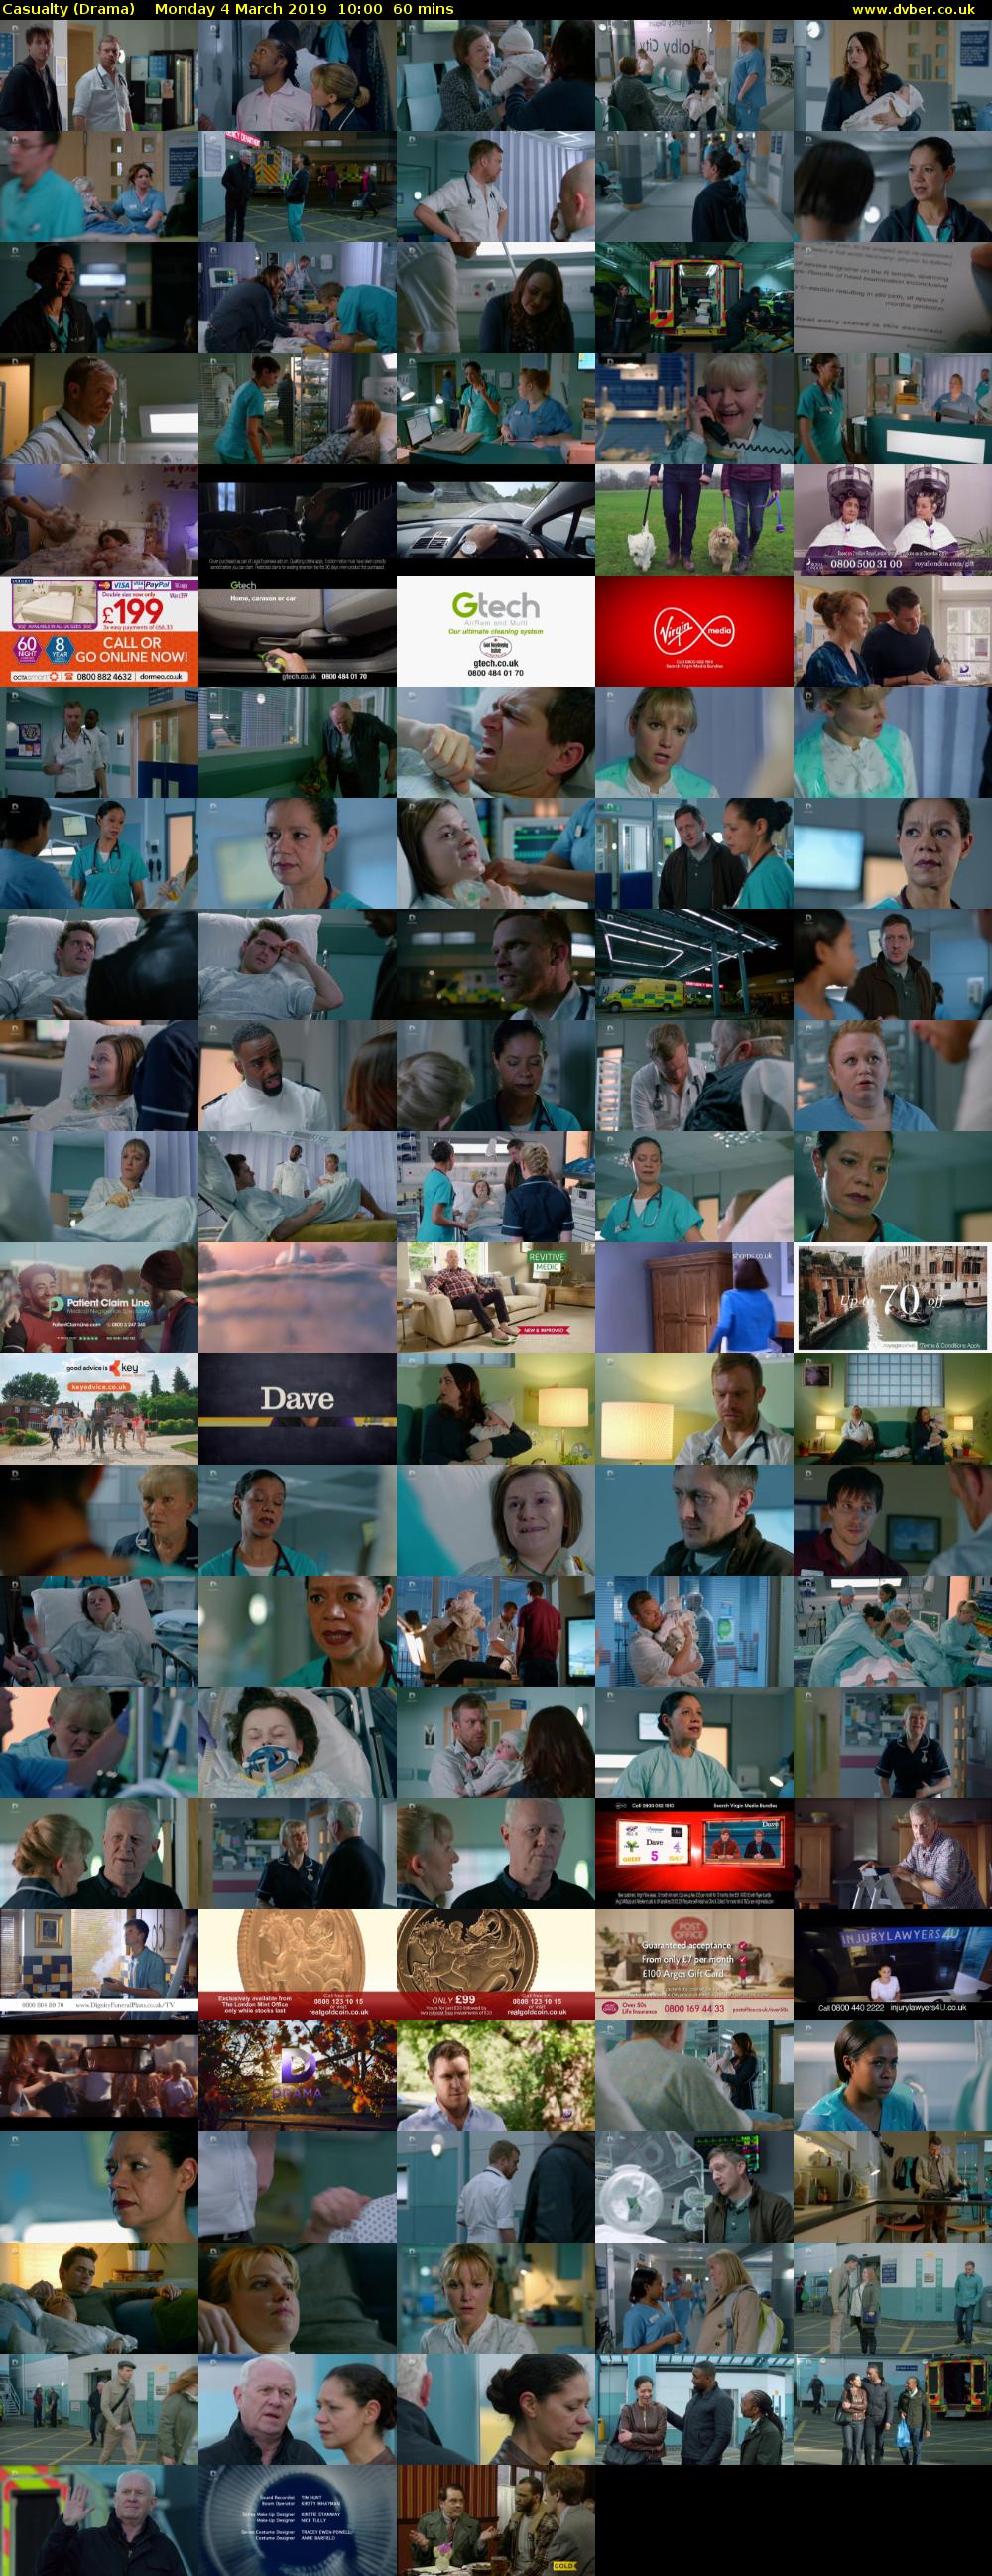 Casualty (Drama) Monday 4 March 2019 10:00 - 11:00